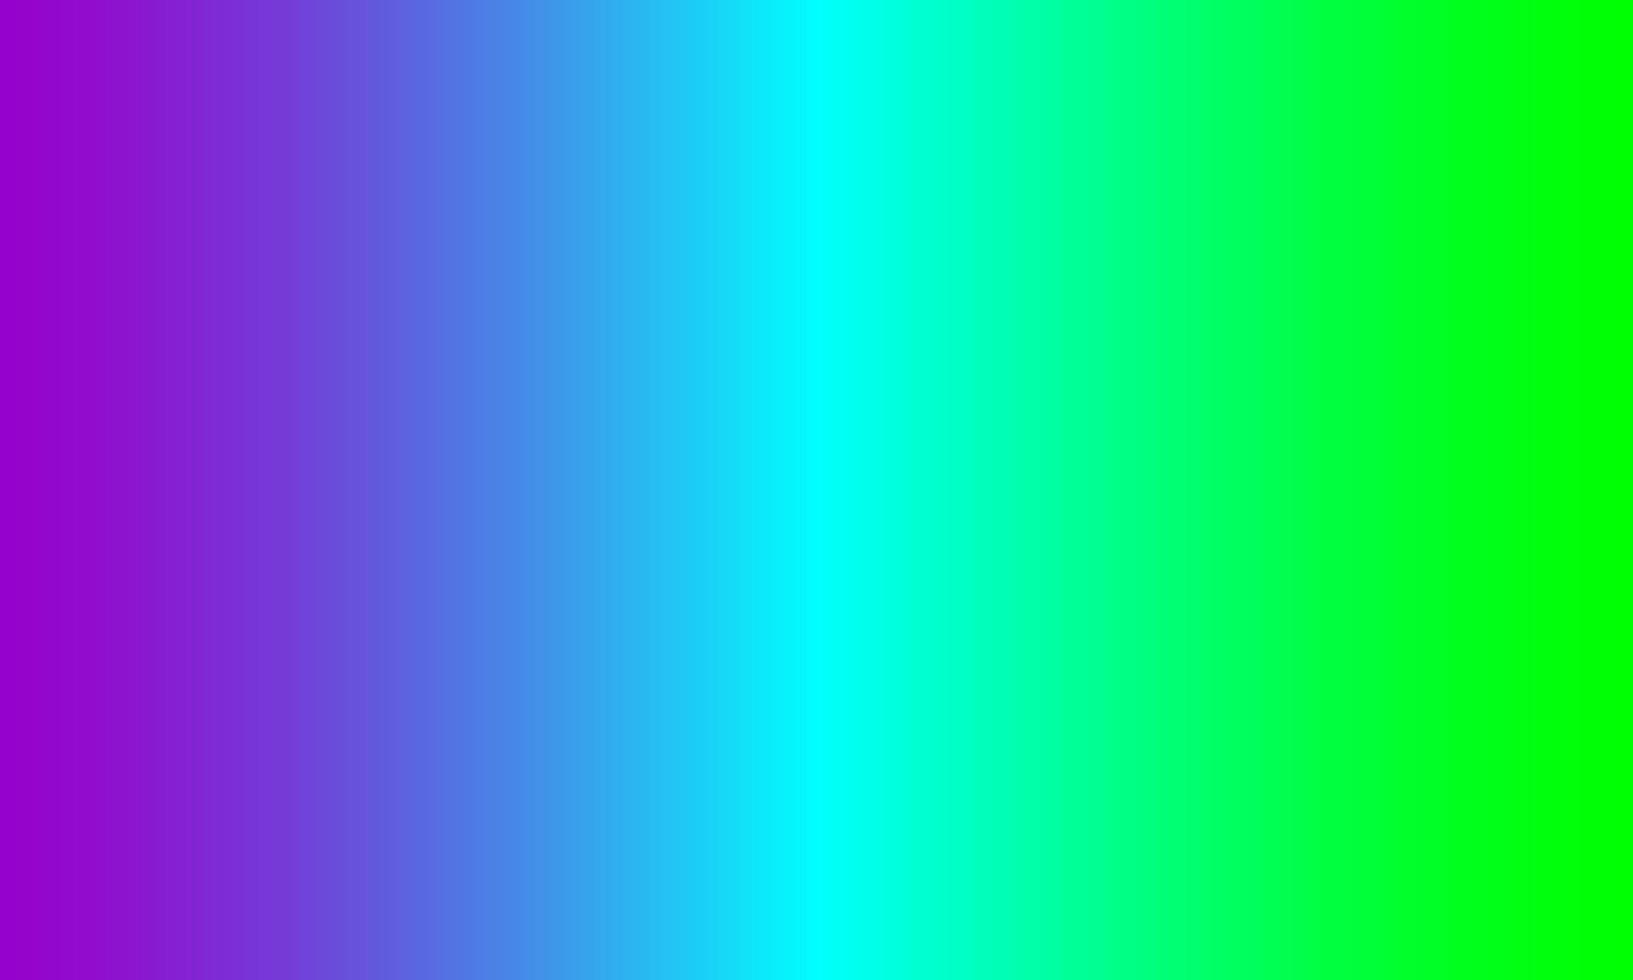 purple, pastel blue and green gradient. abstract, blank, clean, colors, cheerful and simple style. suitable for background, banner, flyer, pamphlet, wallpaper or decor vector